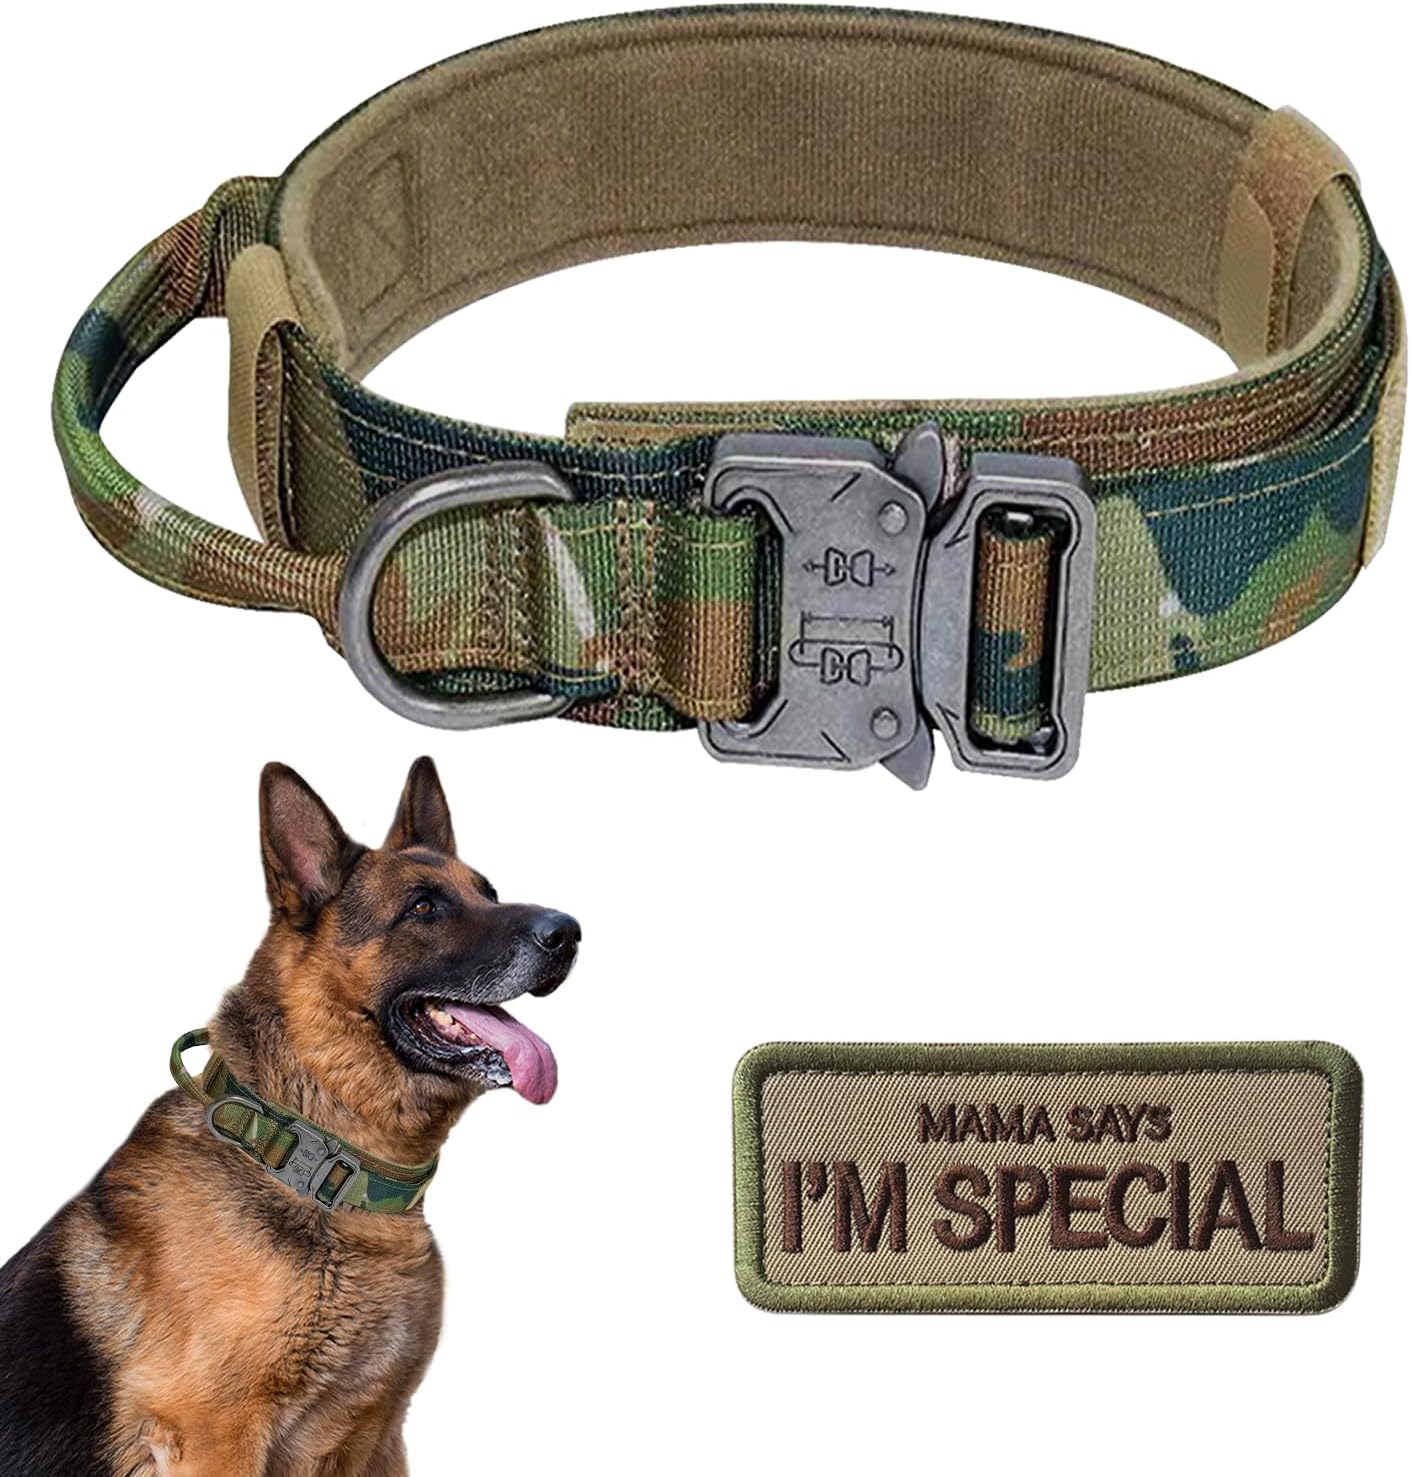 Tactical Dog Collar with Handle - Military Dog Collars Adjustable Training Collar Soft Nylon Dog Collar and Heavy Duty Metal Buckle for Medium Large Dogs - with Patch